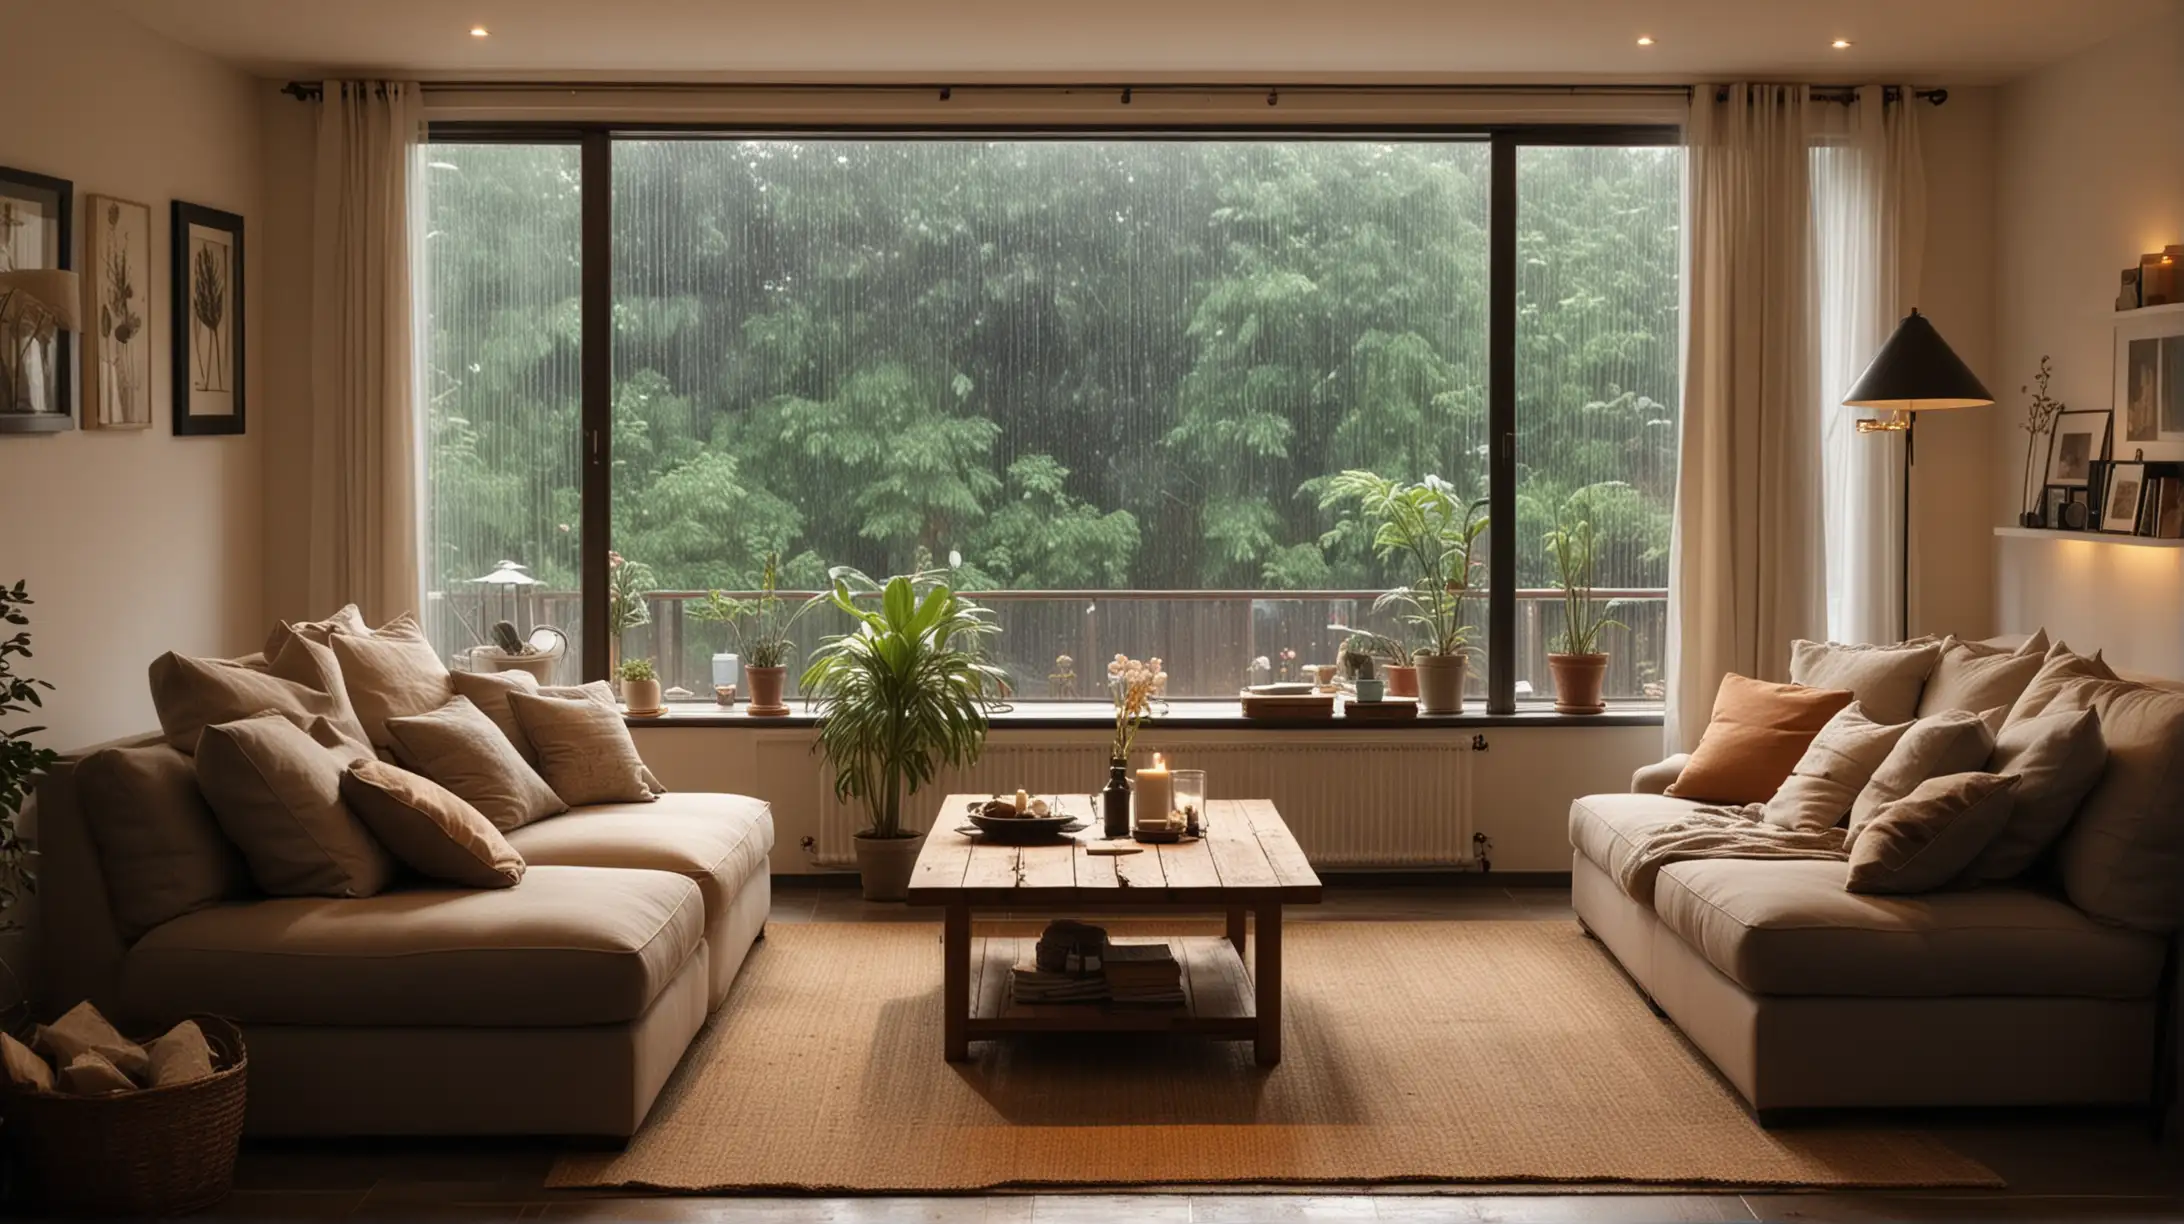 Cozy Living Room with Rainy Ambiance